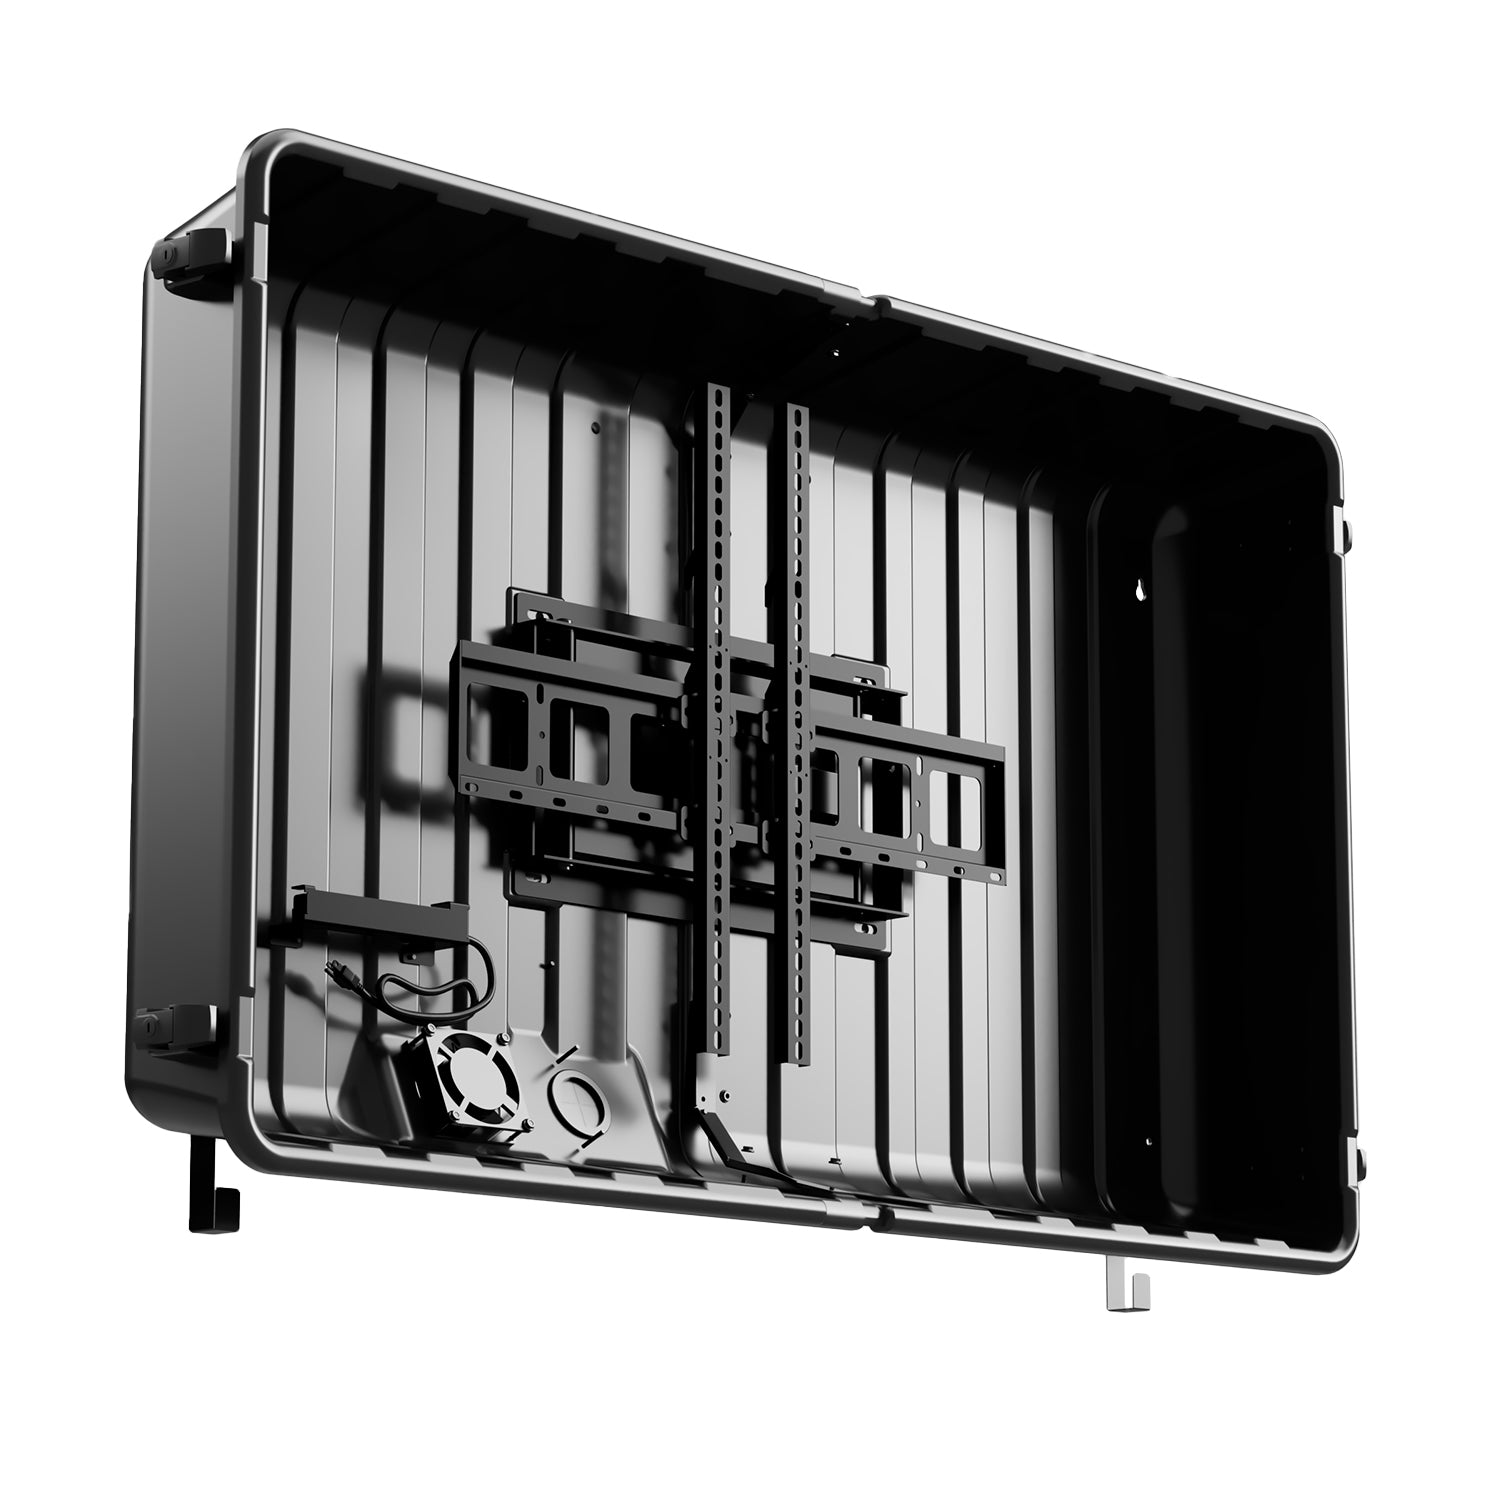 Storm Shell Outdoor Weatherproof TV Enclosure with ariticulating arm and mounting hardware. Fits up to 55" TV with front cover removed